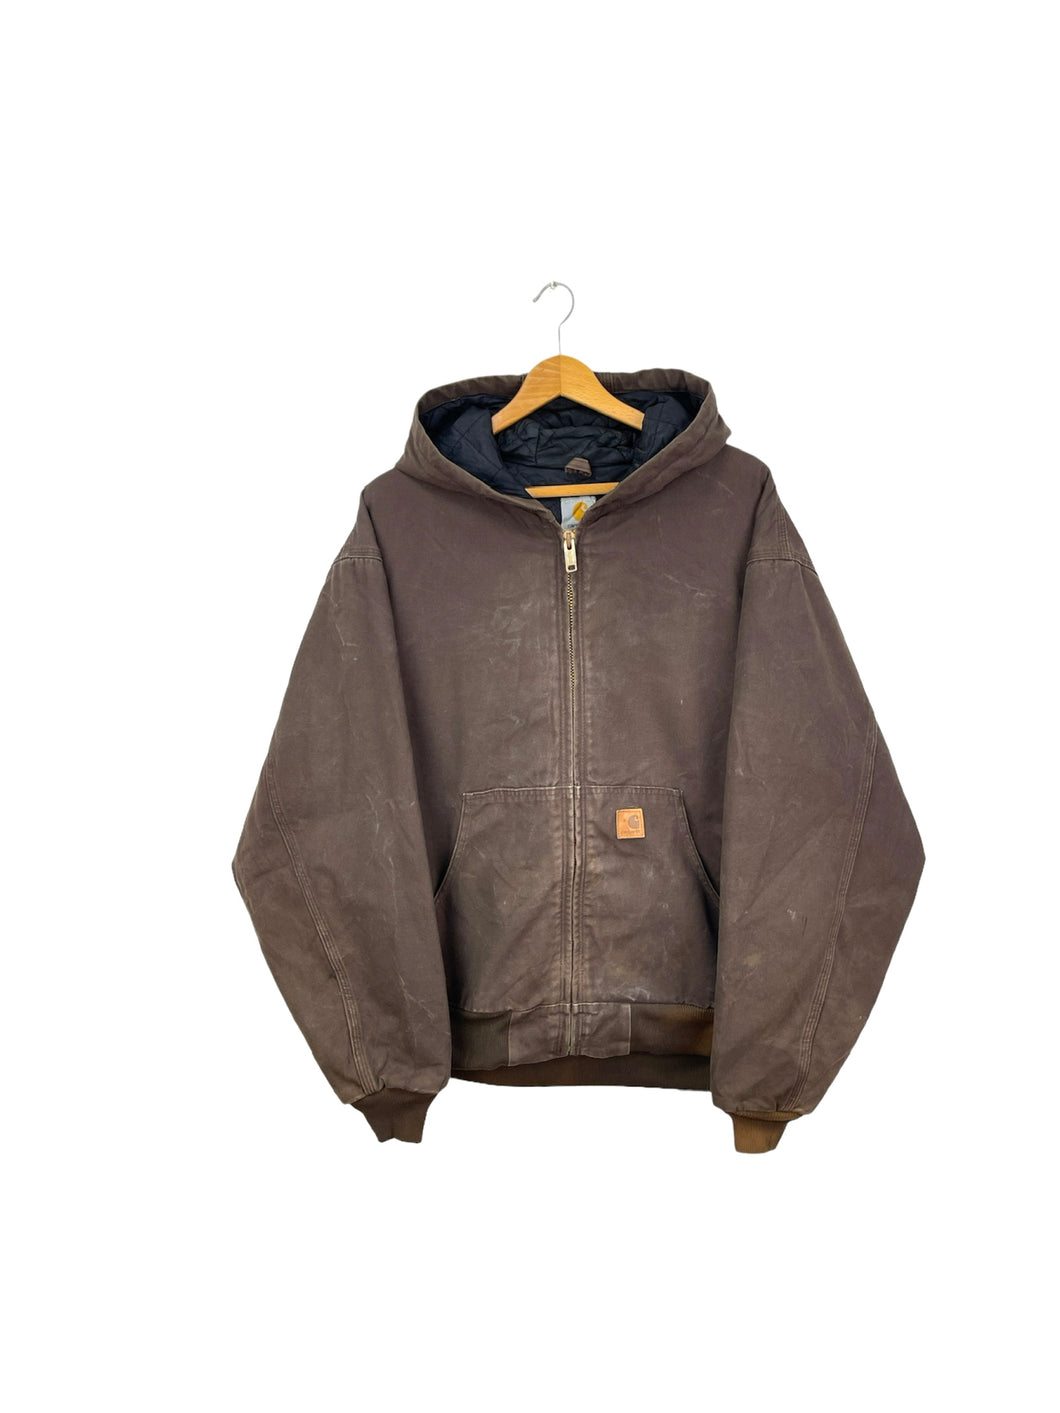 Carhartt Quilted Active Jacket - XLarge